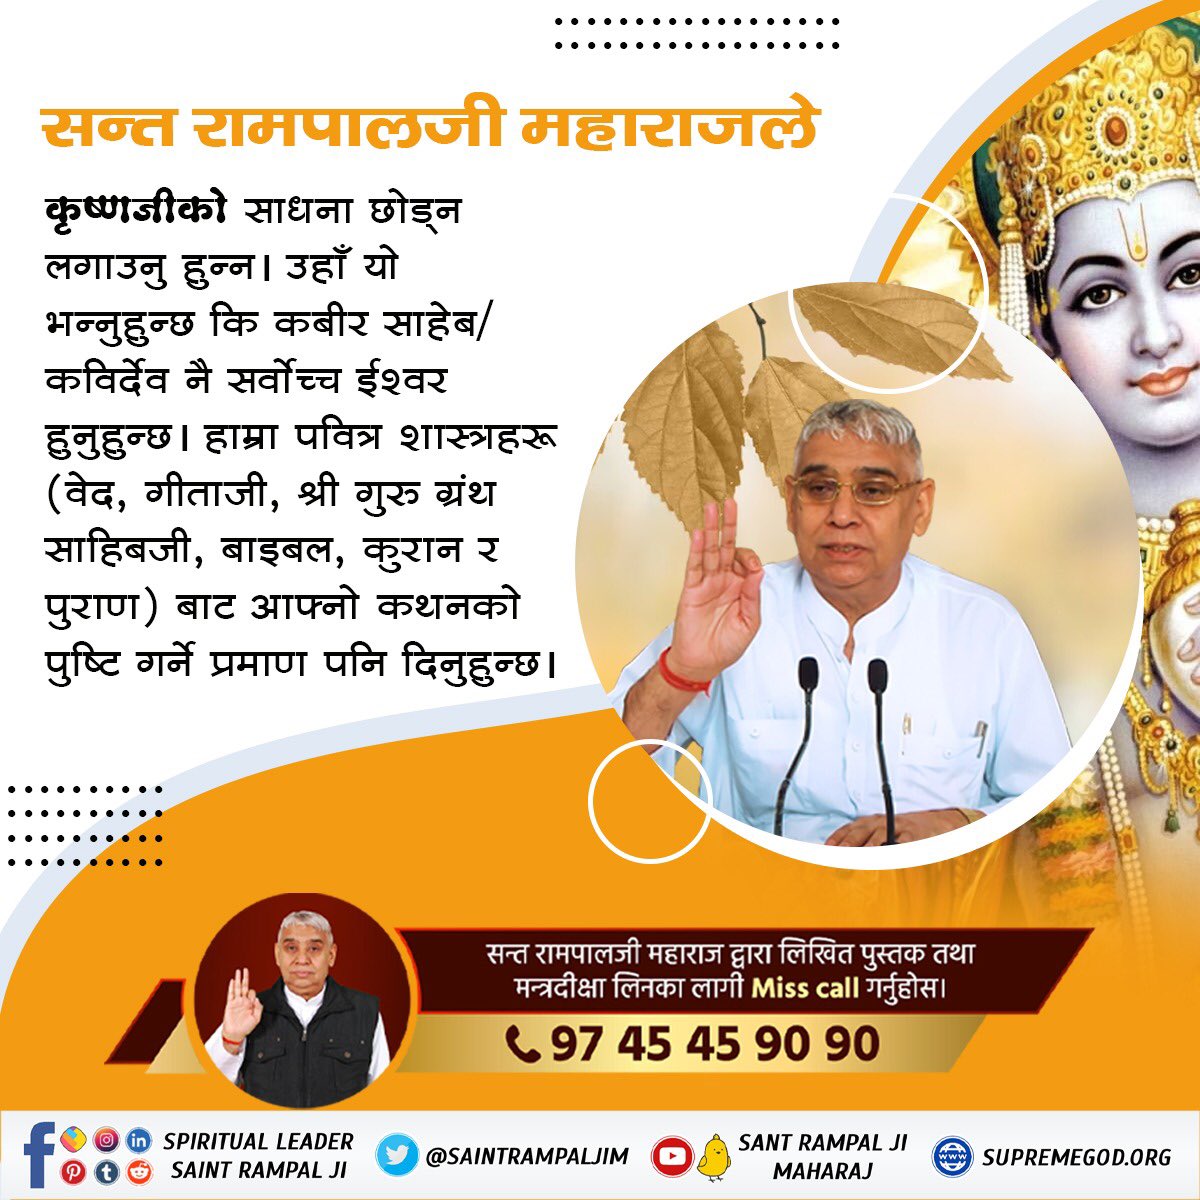 #तिनै_देवता_कमलमा Sant Rampal Ji Maharaj's teachings are very practical. He teaches that the purpose of life is to achieve liberation from the cycle of birth and death. He teaches that this can be achieved through a combination of spiritual practice and Knowledge.